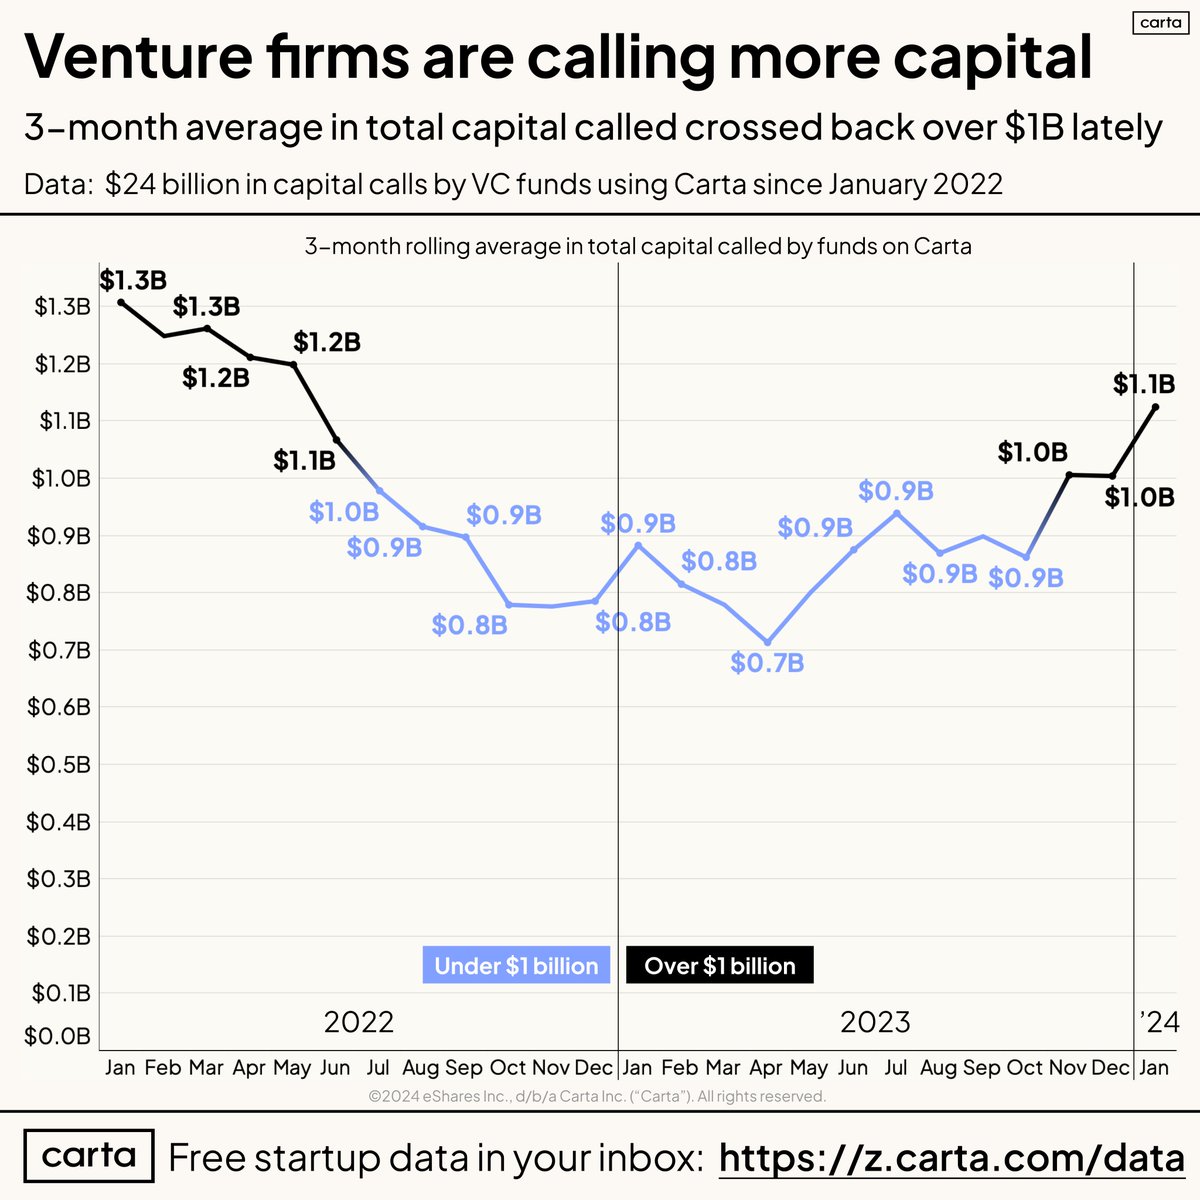 US VCs on Carta called more capital in Jan 2024 than at any point since mid-2022. Bullish 🙏